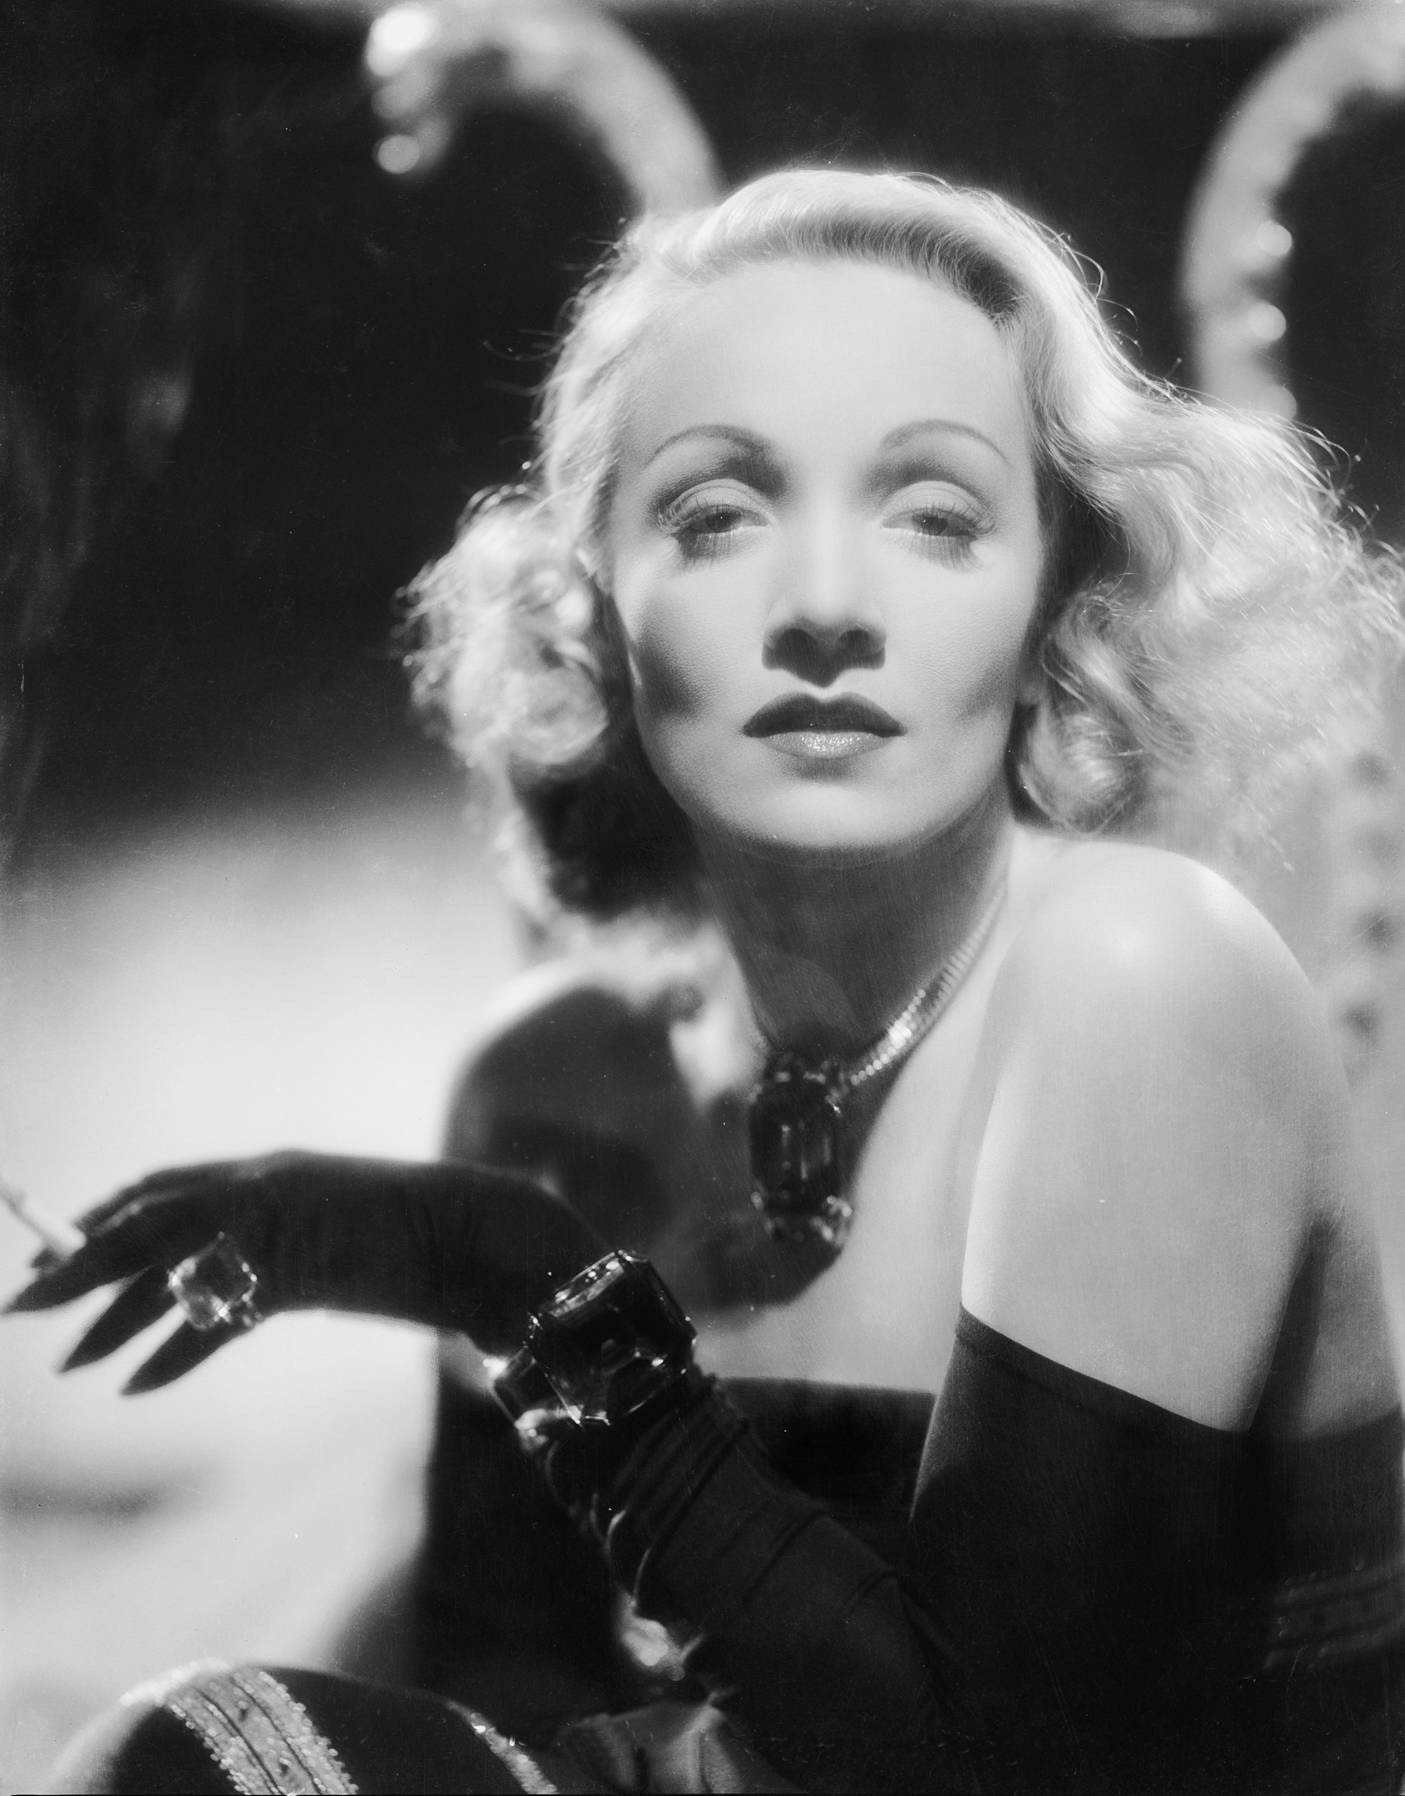 Marlene Dietrich Hd Wallpapers 7wallpapers Net Images, Photos, Reviews